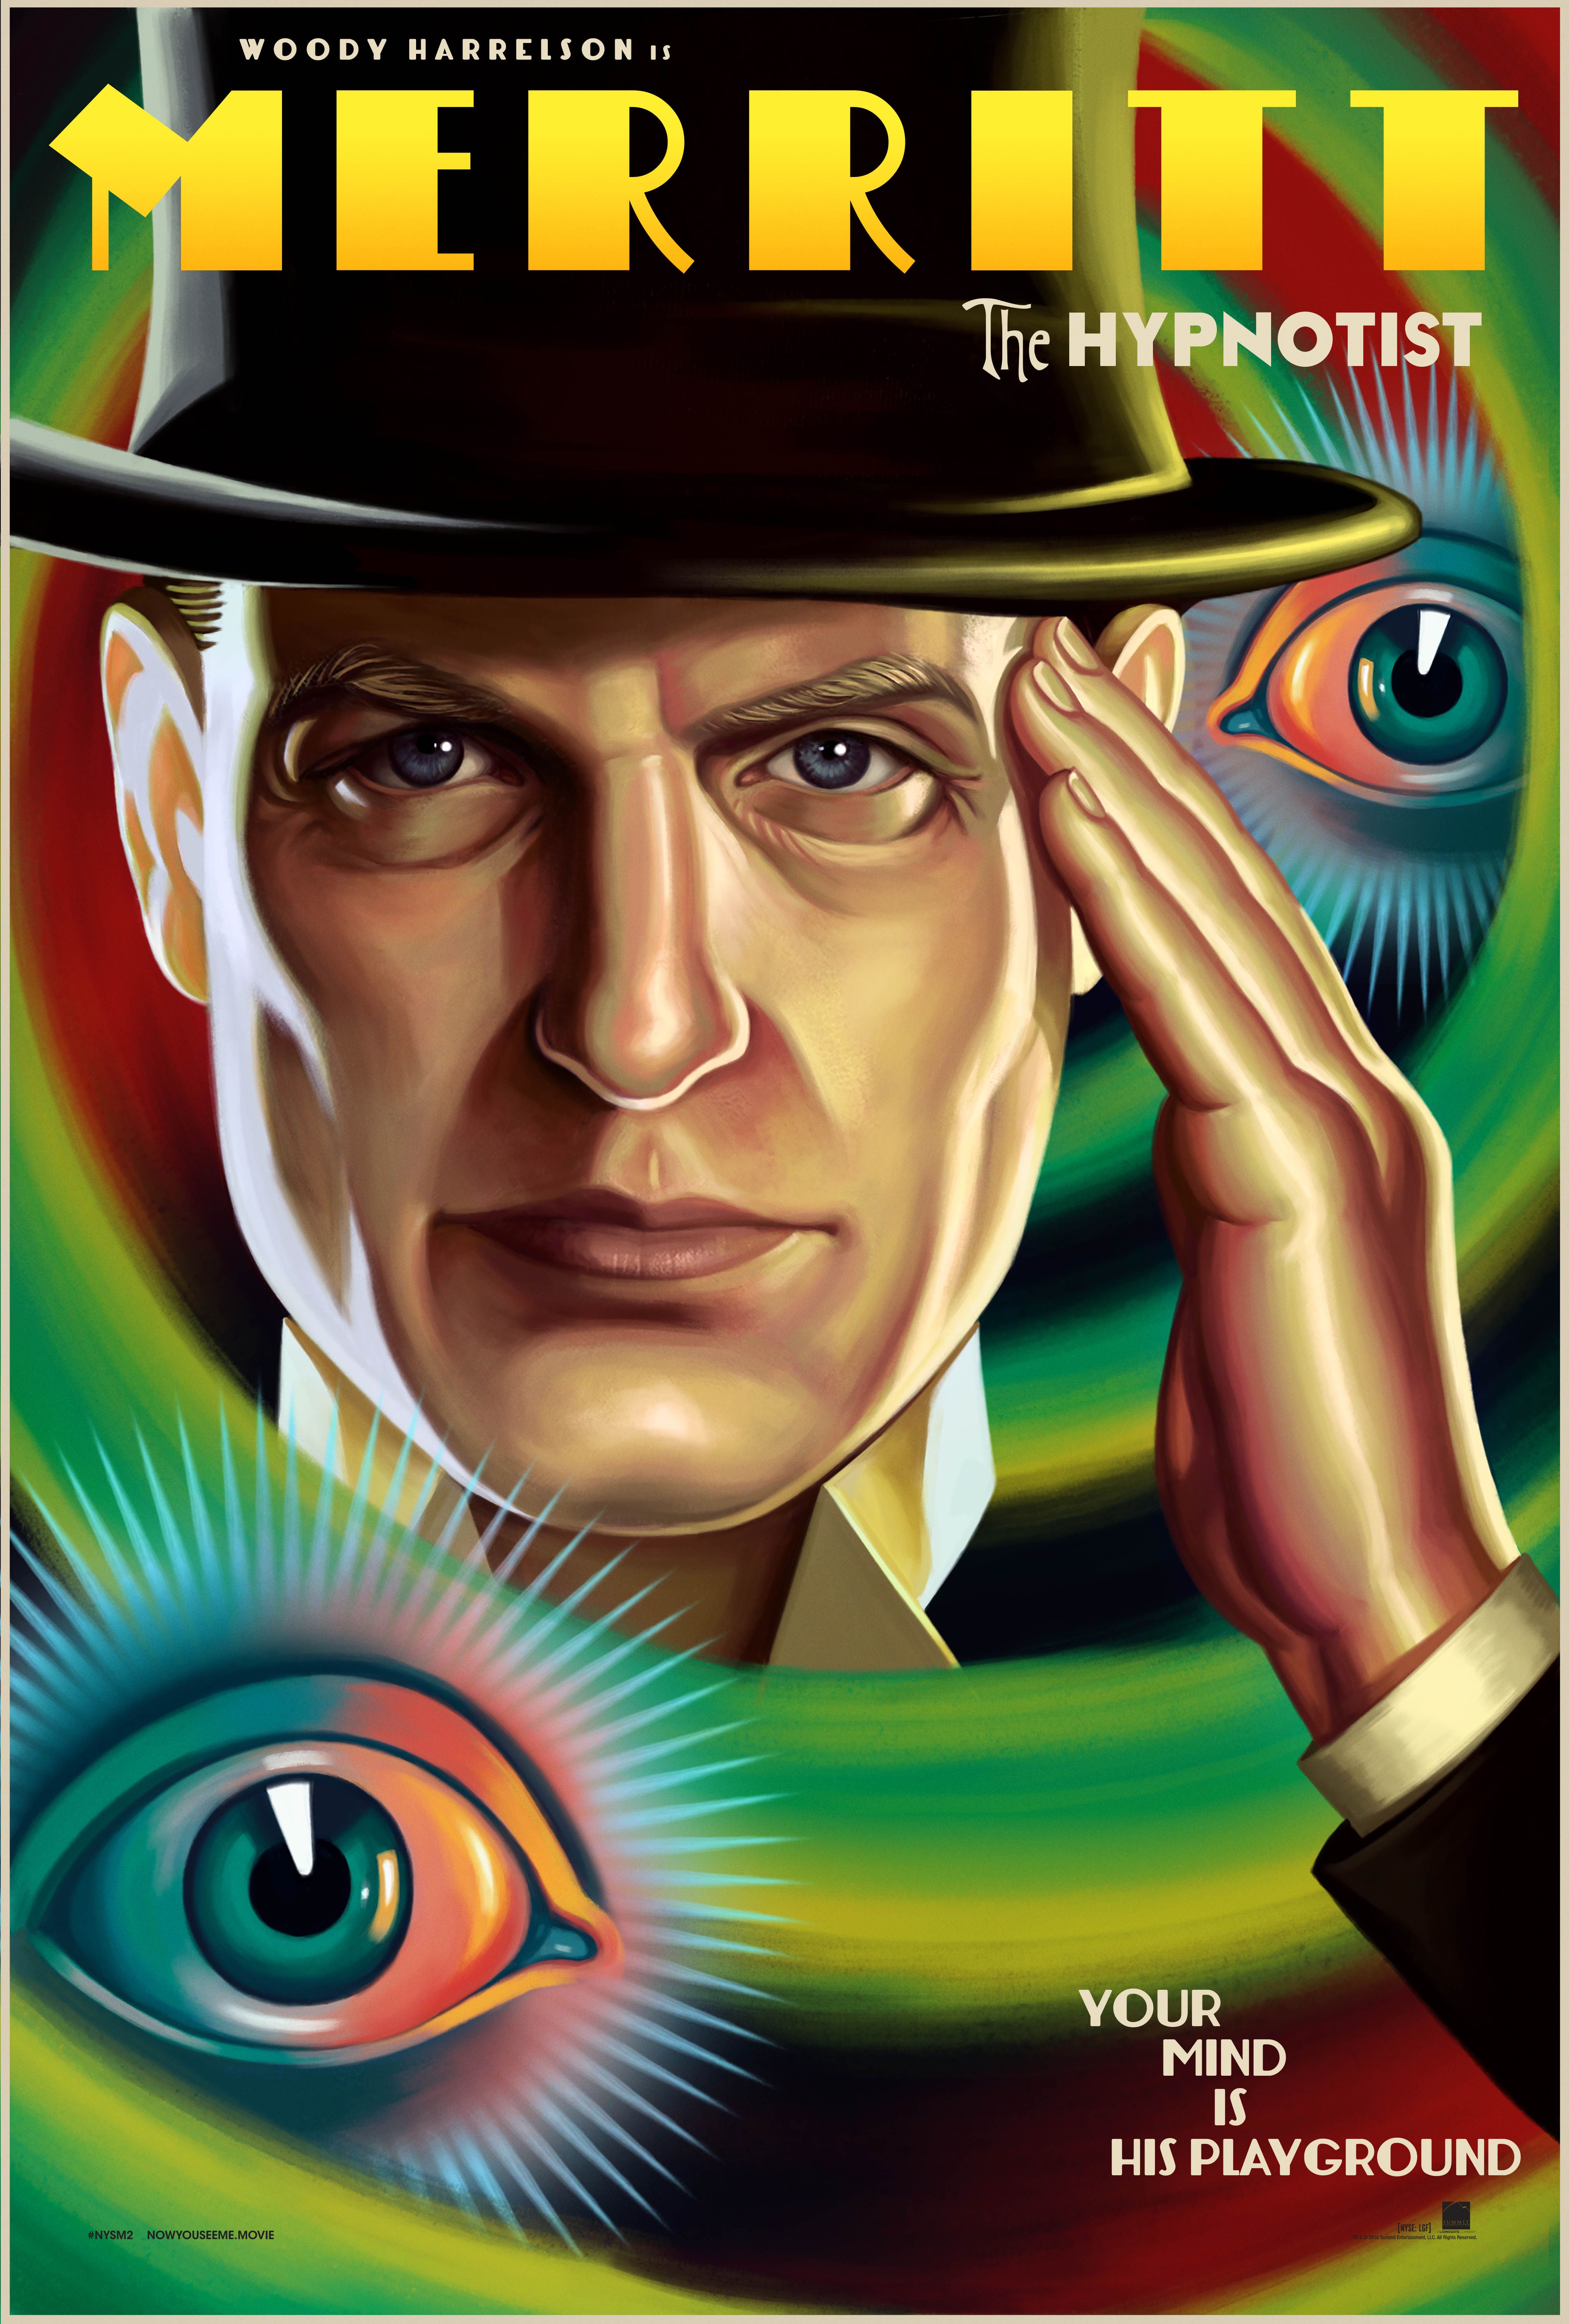 Now You See Me 2 Woody Harrelson wallpaper 2018 in Movies